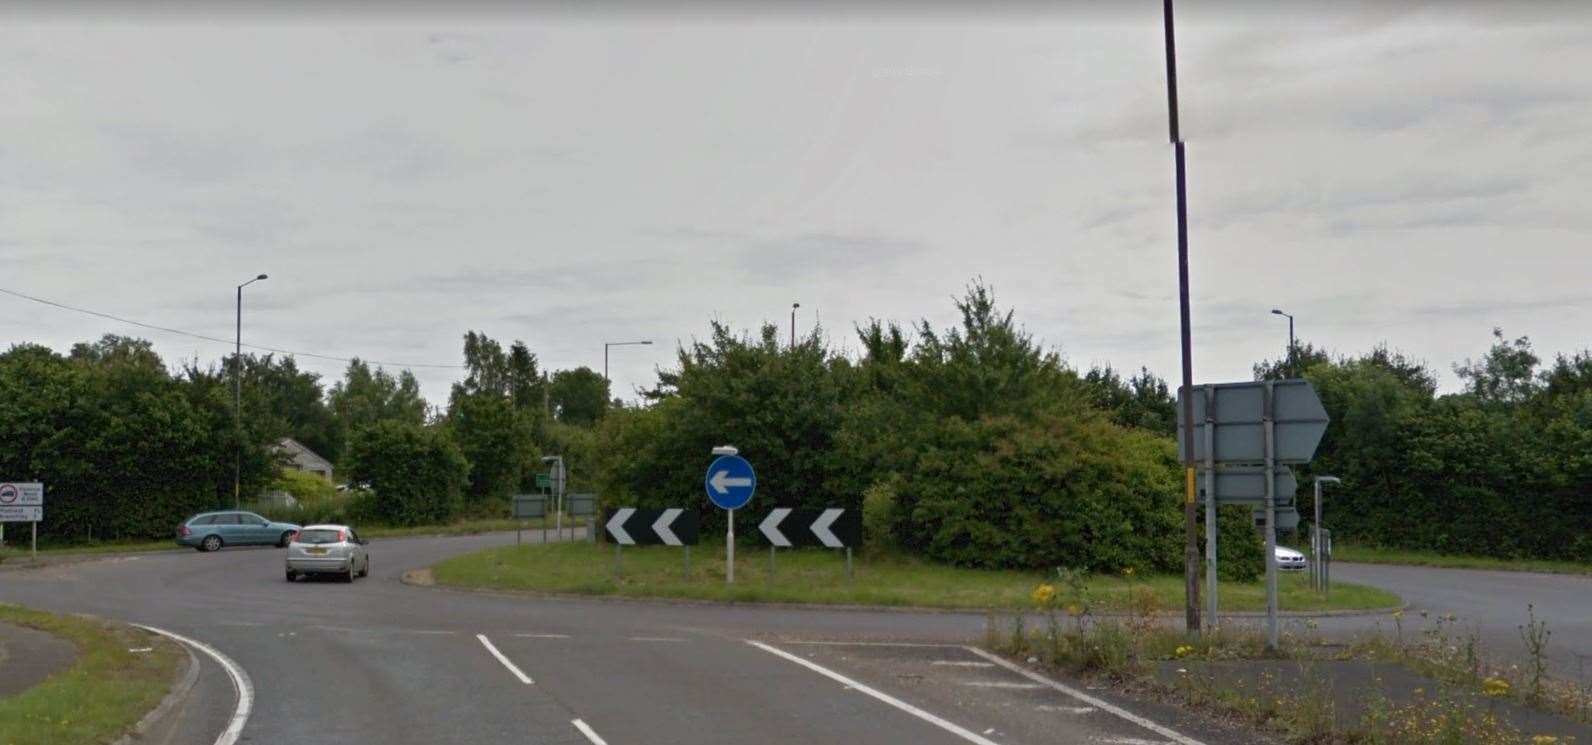 The incident happened near the Kipping's Cross roundabout along the A21 Credit to Google Maps (20558083)